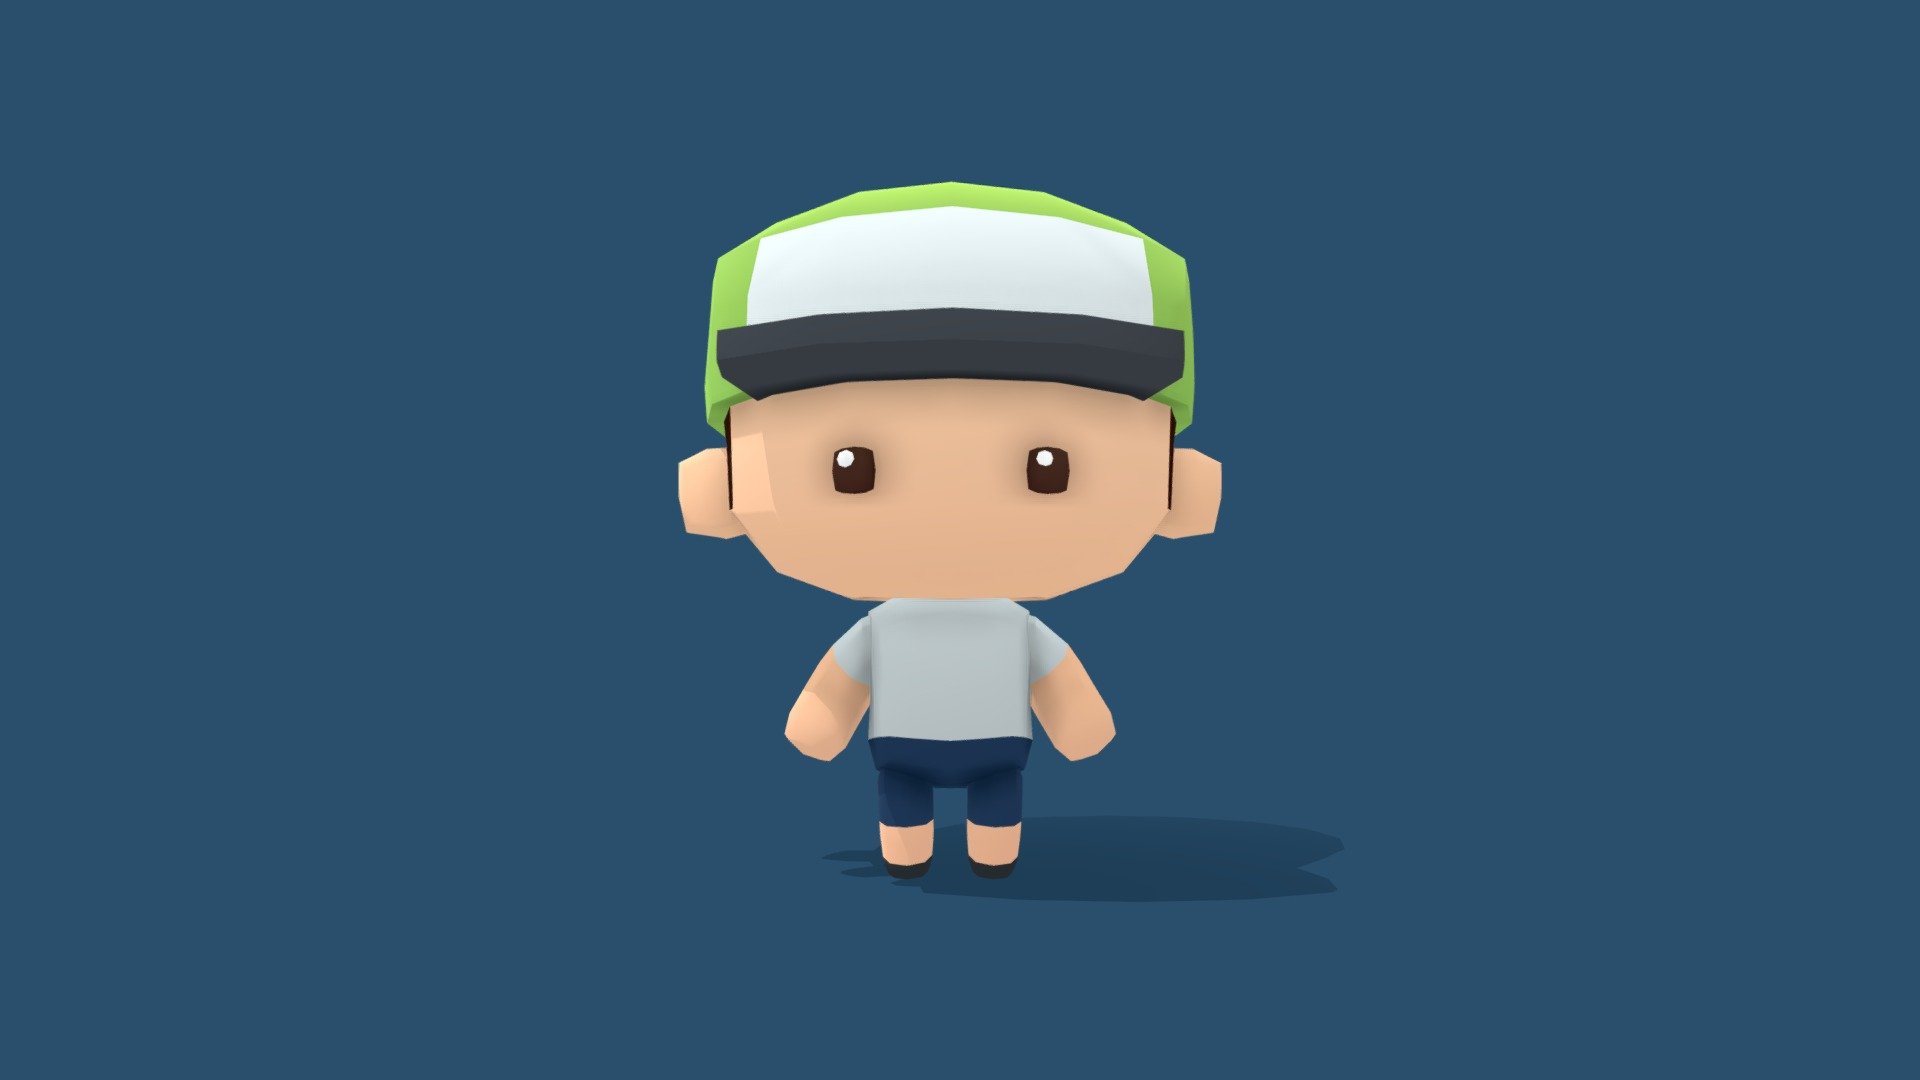 This lowpoly character is a demo of a series of stylized lowpoly characters (Mini Chibi Characters) that are ideal to build your game or prototype. This demo base character is intended to you to test and see if it fit your needs before you buy the other characters or packs derived from this basemesh.

This character is extremely light and can be used in both pc and mobile games. It uses a single texture file that is optimized and allows you to customize the colors according to your needs just by duplicating the material and adjusting the material offset.

*Check the additional zipped file when buying this pack to access the rigged character, props and textures.



-Rigged/Skinned

-Mecanim Ready

-Texture: 256px Diffuse





-Polycount:



Character:

Mini Chibi Kid |1.4k Tris





Animations

TPose

Walk

Run

Jump

Loose





Blendshapes

Eyes:

Blink

Happy

Angry

Sad - Mini Chibi Kid (Free Demo) - Download Free 3D model by joaobaltieri 3d model